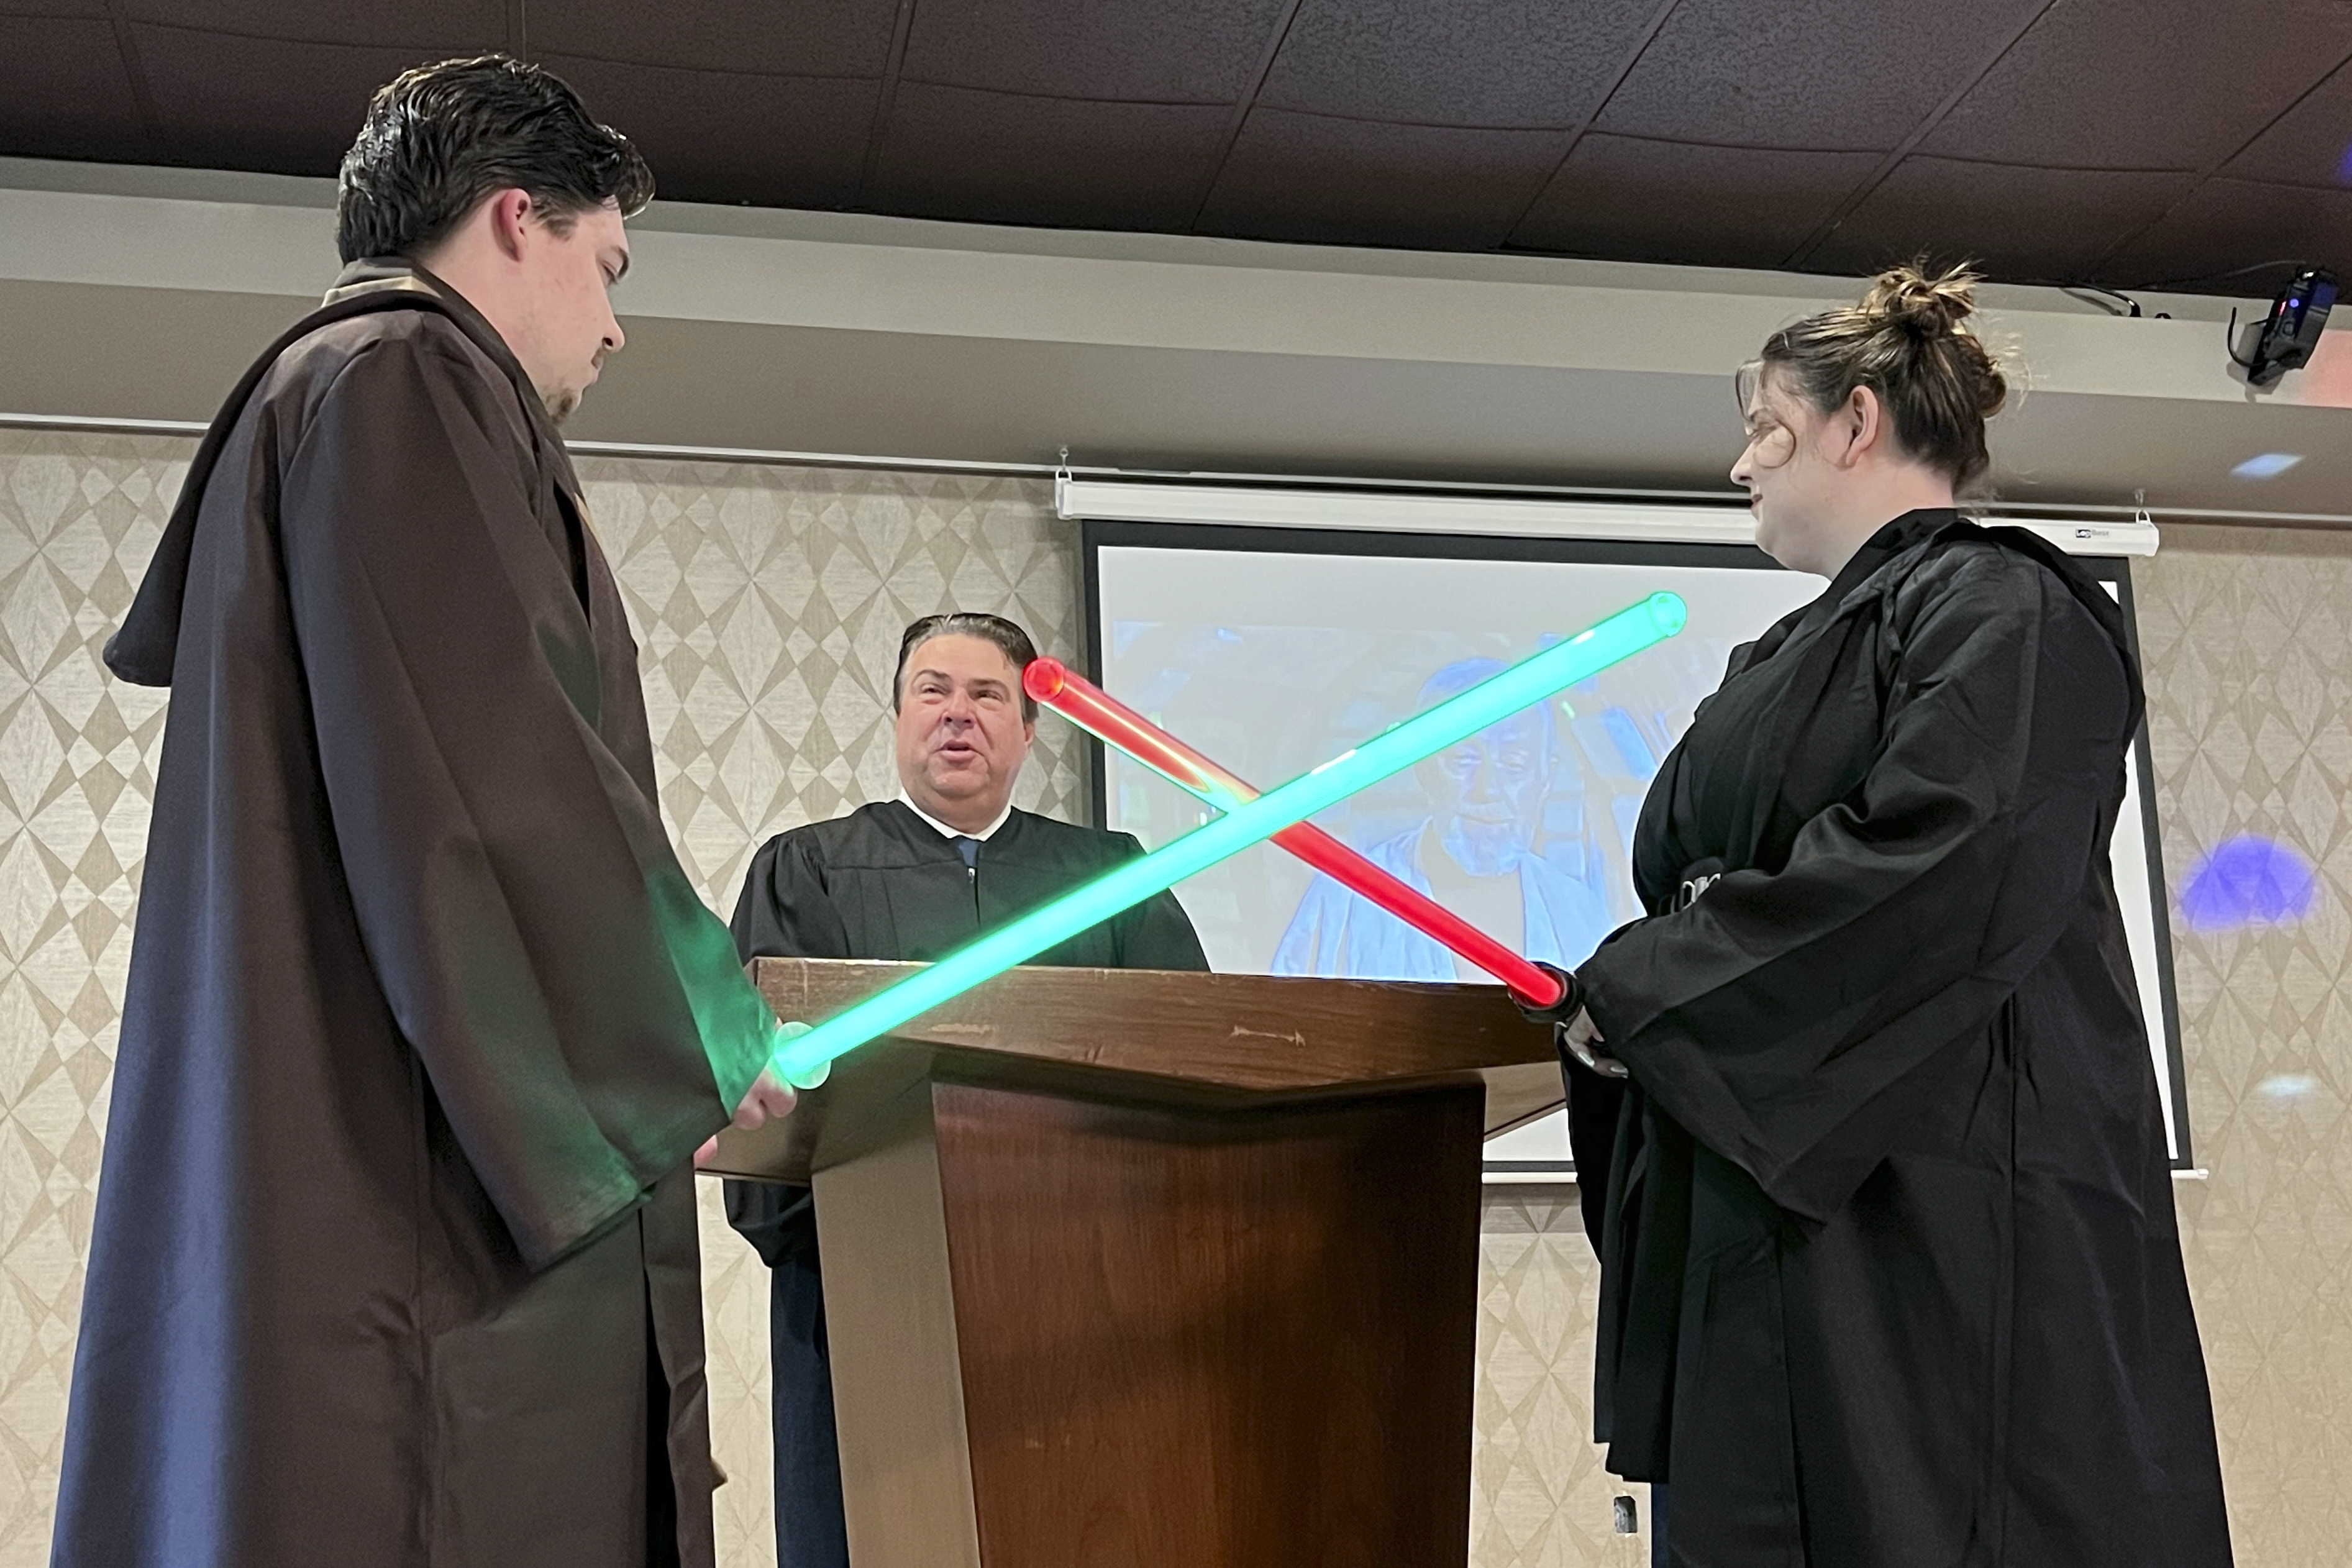 Julia and Robert Jones exchange vows during their wedding ceremony in Akron, Ohio, on Thursday, May 4, 2023. Couples celebrated May the Fourth with a "Star Wars" themed wedding. (AP Photo/Patrick Orsagos)